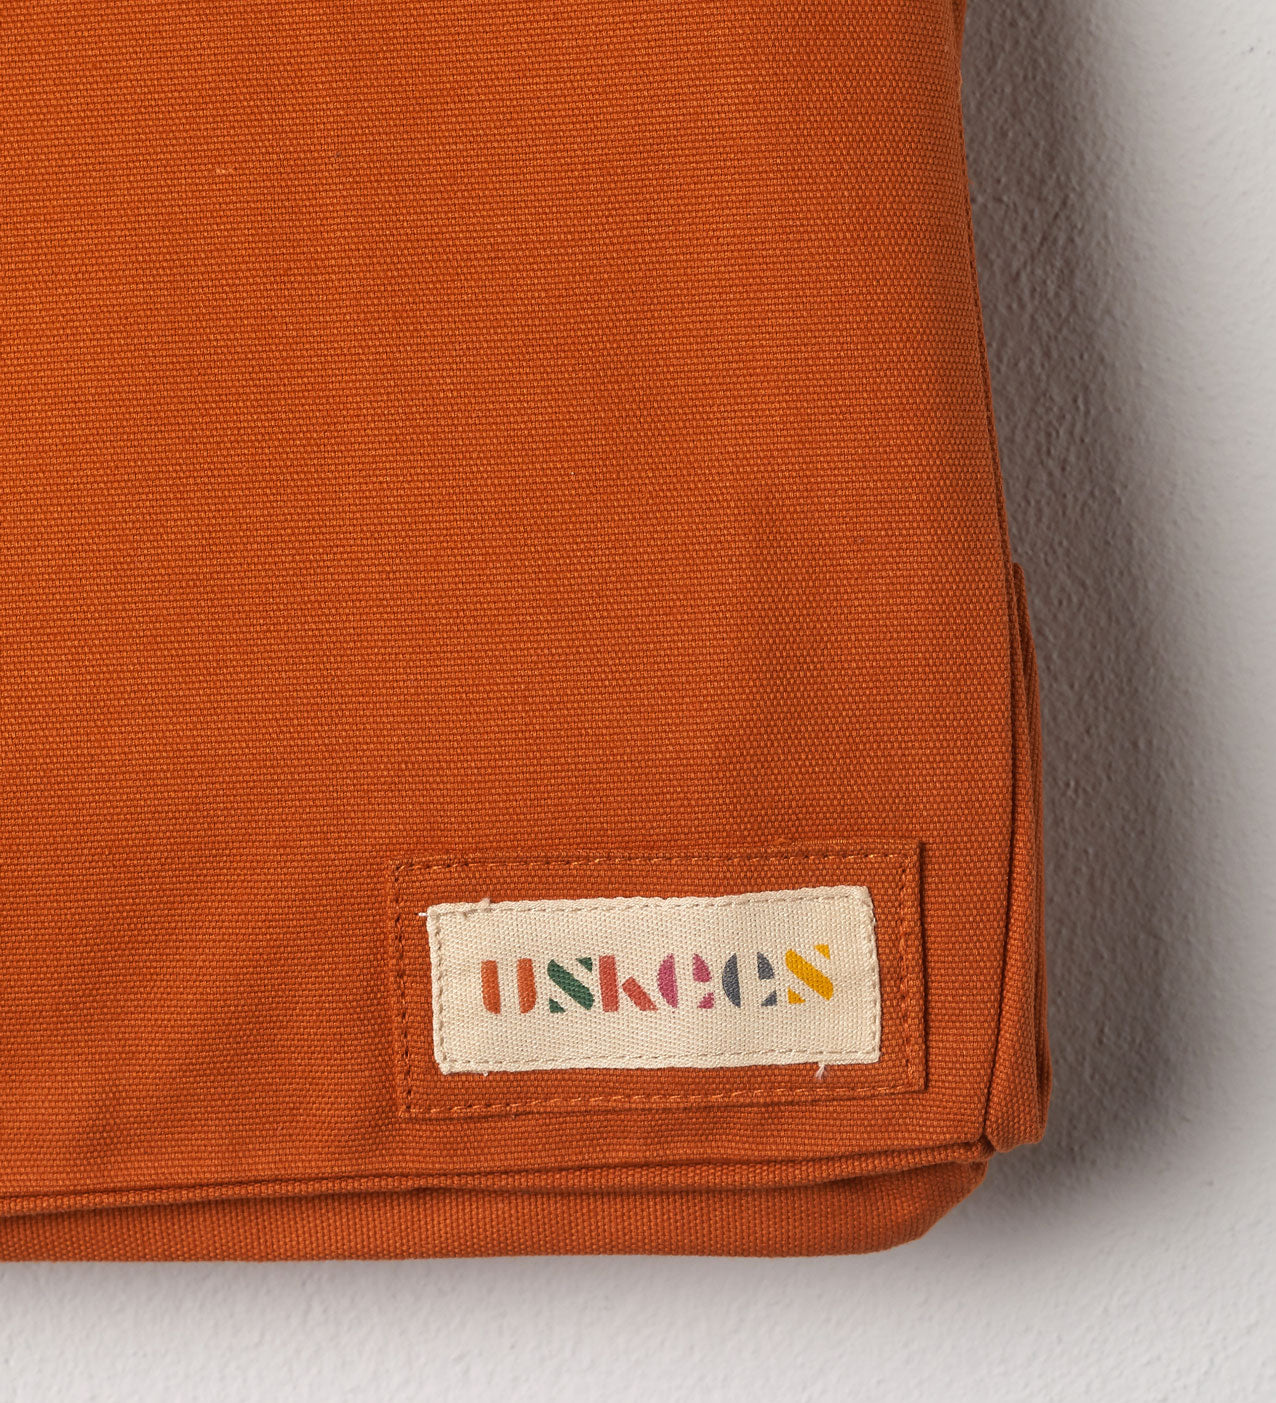 Close-up view of Uskees #4001 large tote bag in orange gold showing the Uskees woven label.